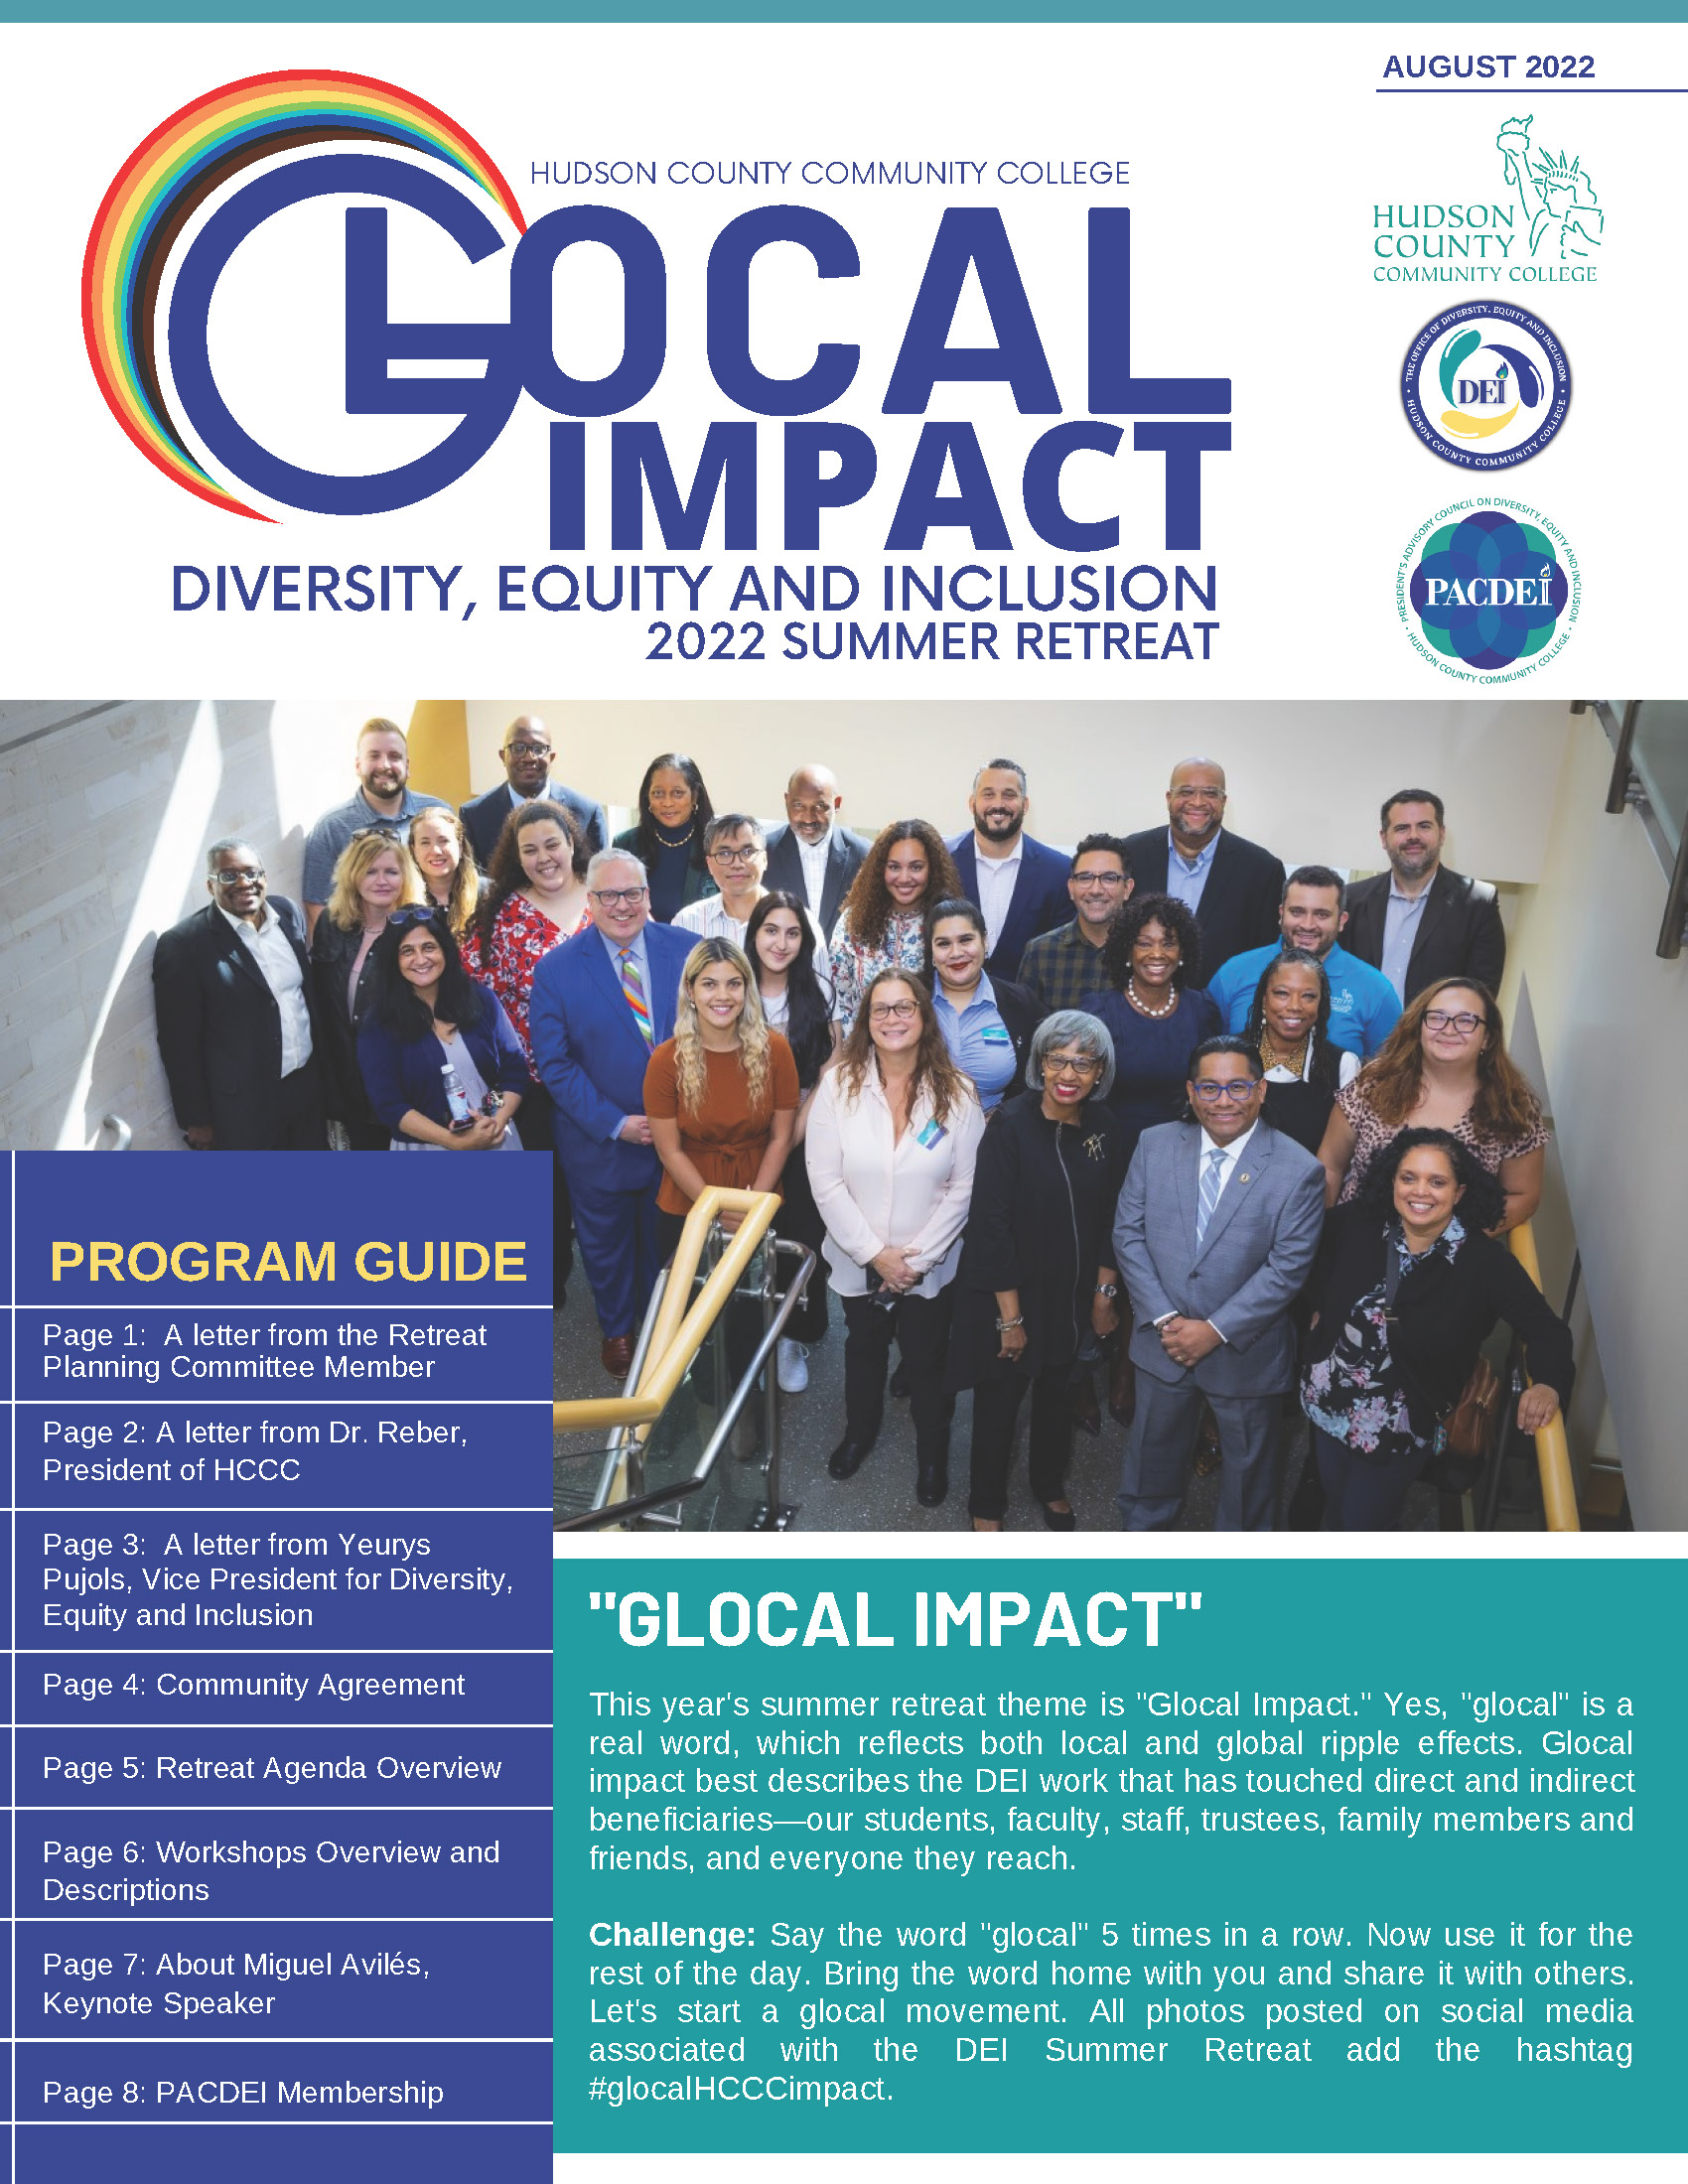 Local Impact - Diversity, Equity and Inclusion 2022 Summer Retreat Program Guide